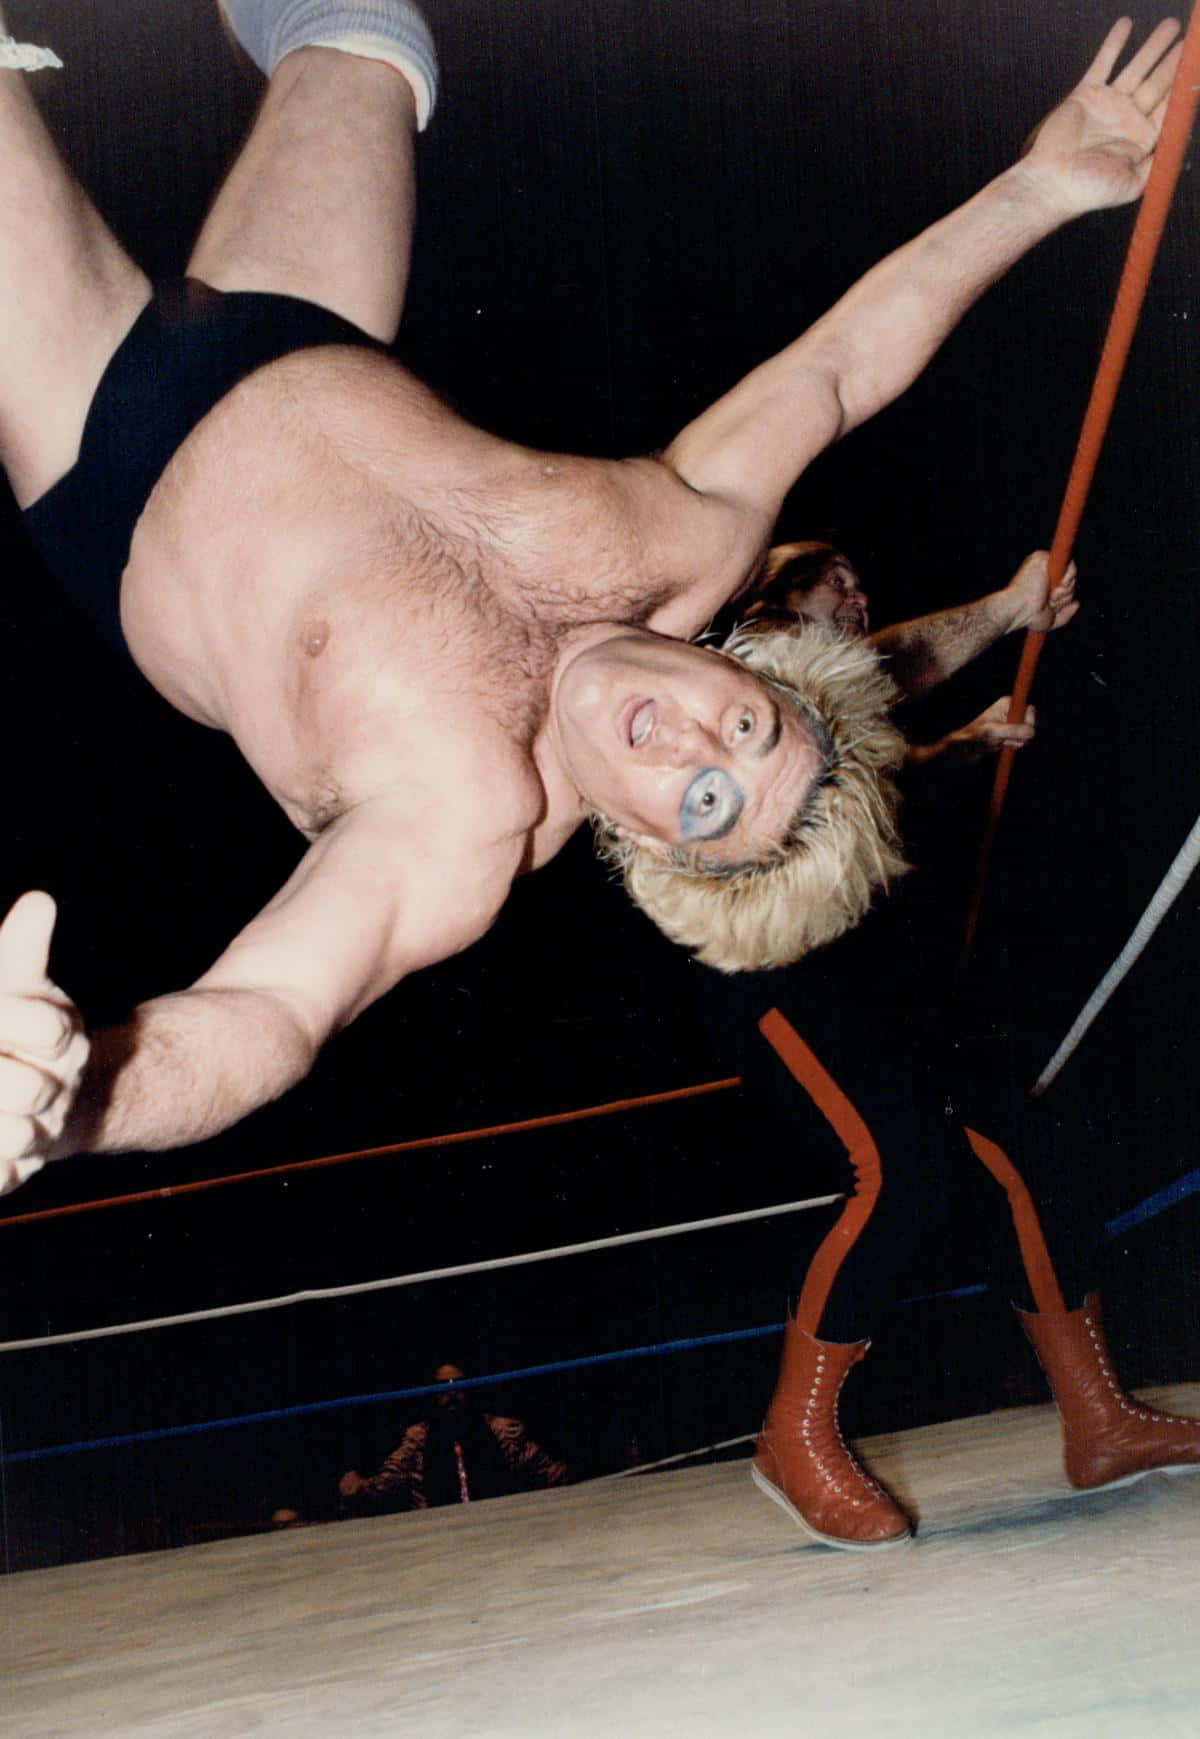 American Professional Wrestler Adrian Adonis brilliantly executing a high-flying flip move. Wallpaper